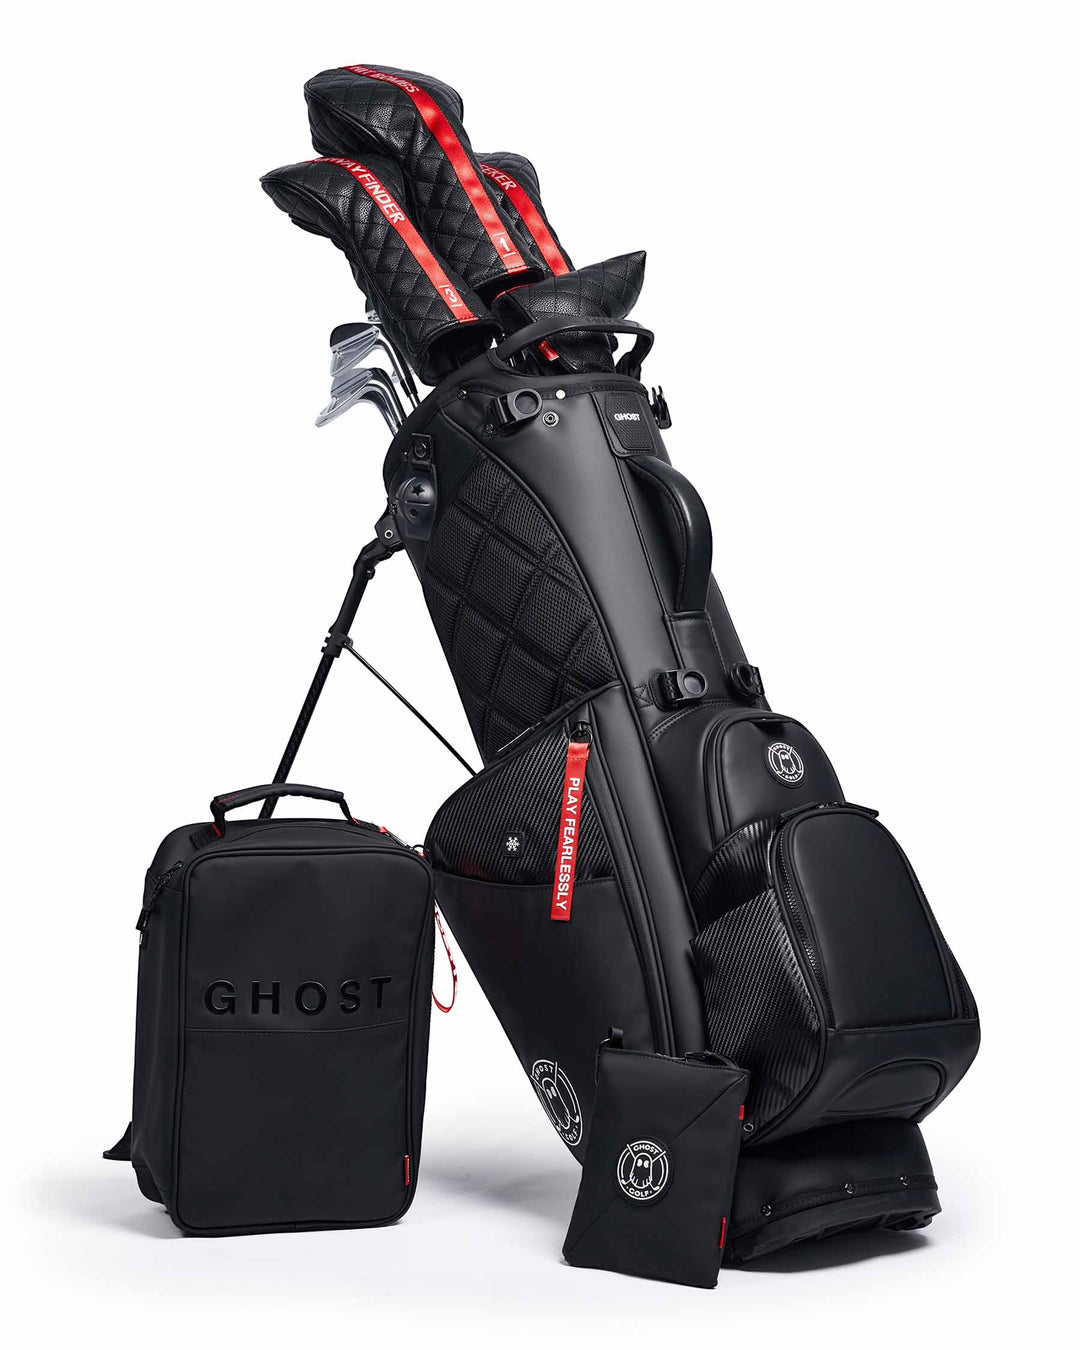 RONIN Black and Carbon Fiber Accents Golf Bag with Red Tags. Golf CLubs with Black and Red Stripe Head Covers.  Black Shoe Bag and Pouch